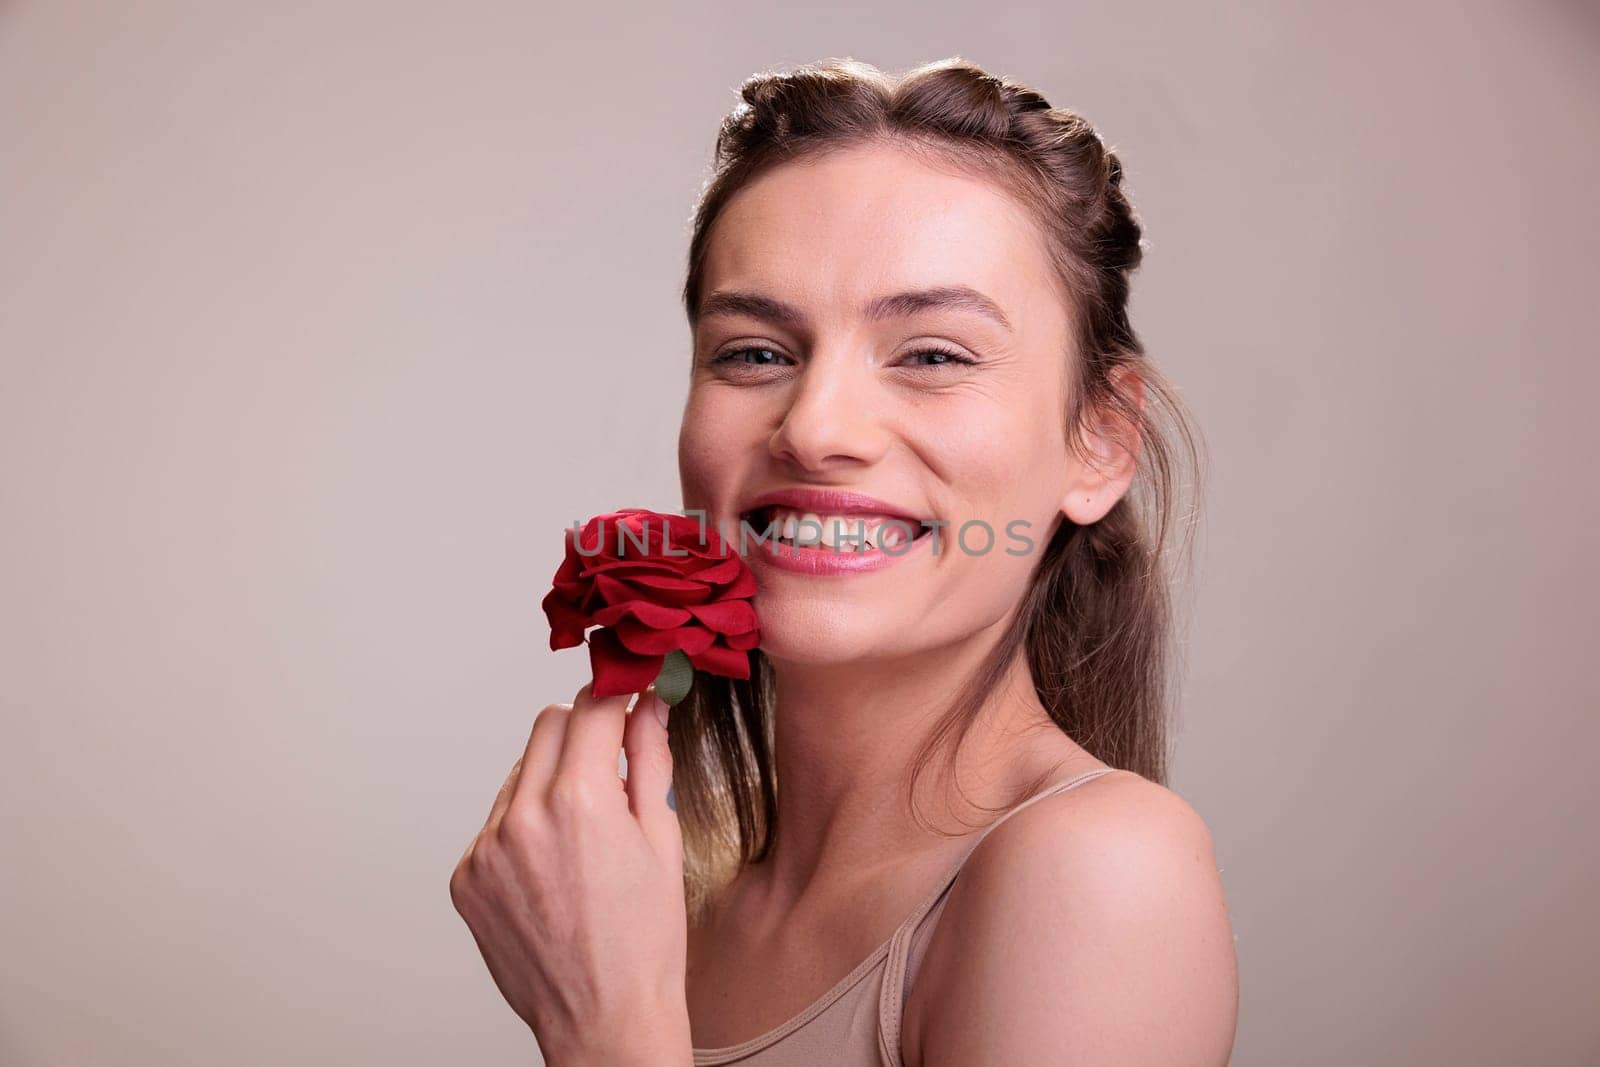 Laughing young woman posing with red rose gift portrait. Attractive cheerful caucasian blonde lady wearing nude makeup holding flower romantic present and expressing positive emotion